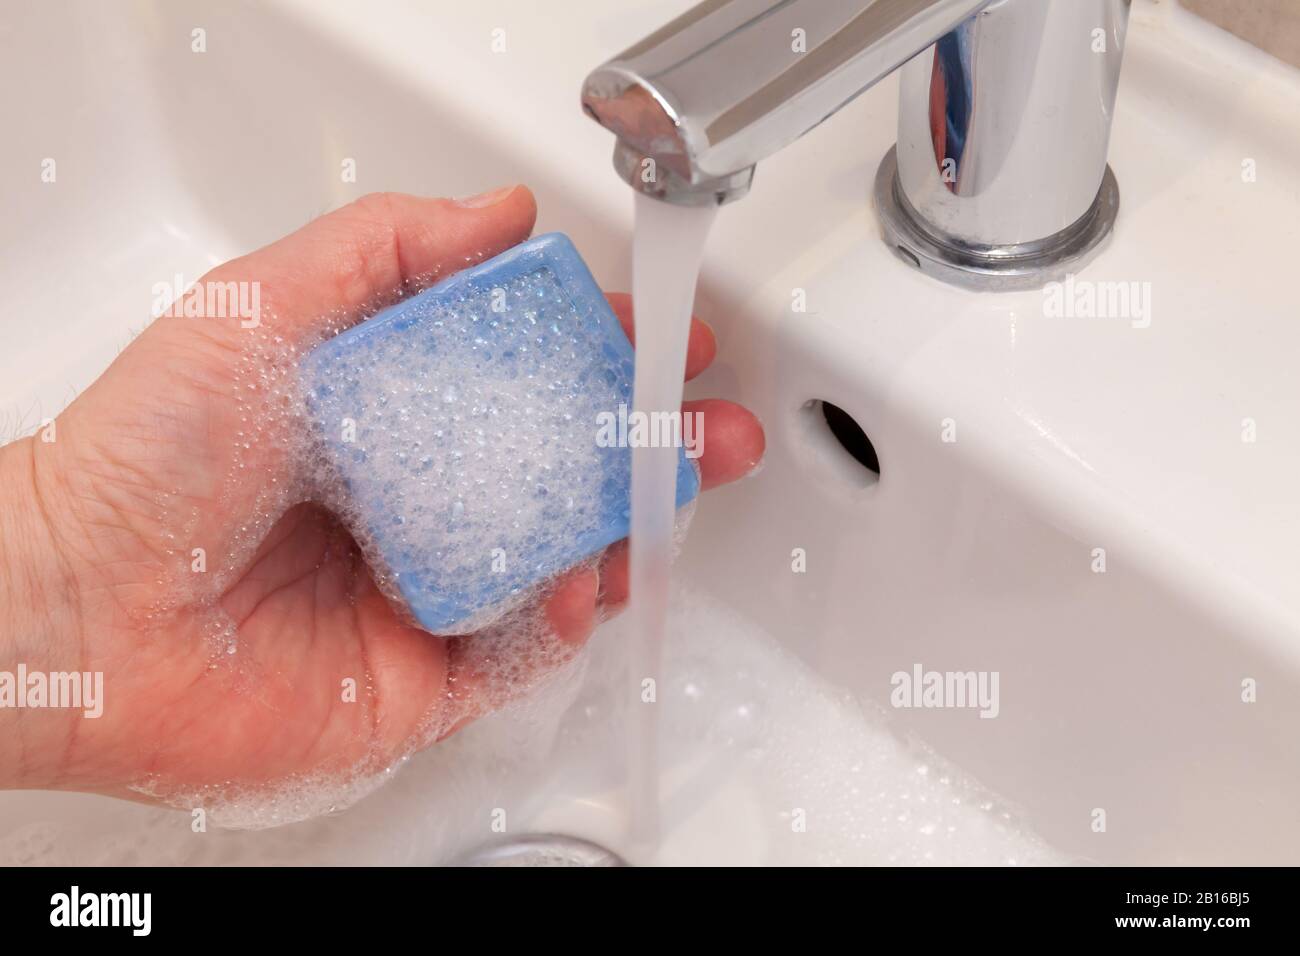 Holding a blue bar of soap under a running tap in a bathroom sink. Medical cleanliness concept Stock Photo